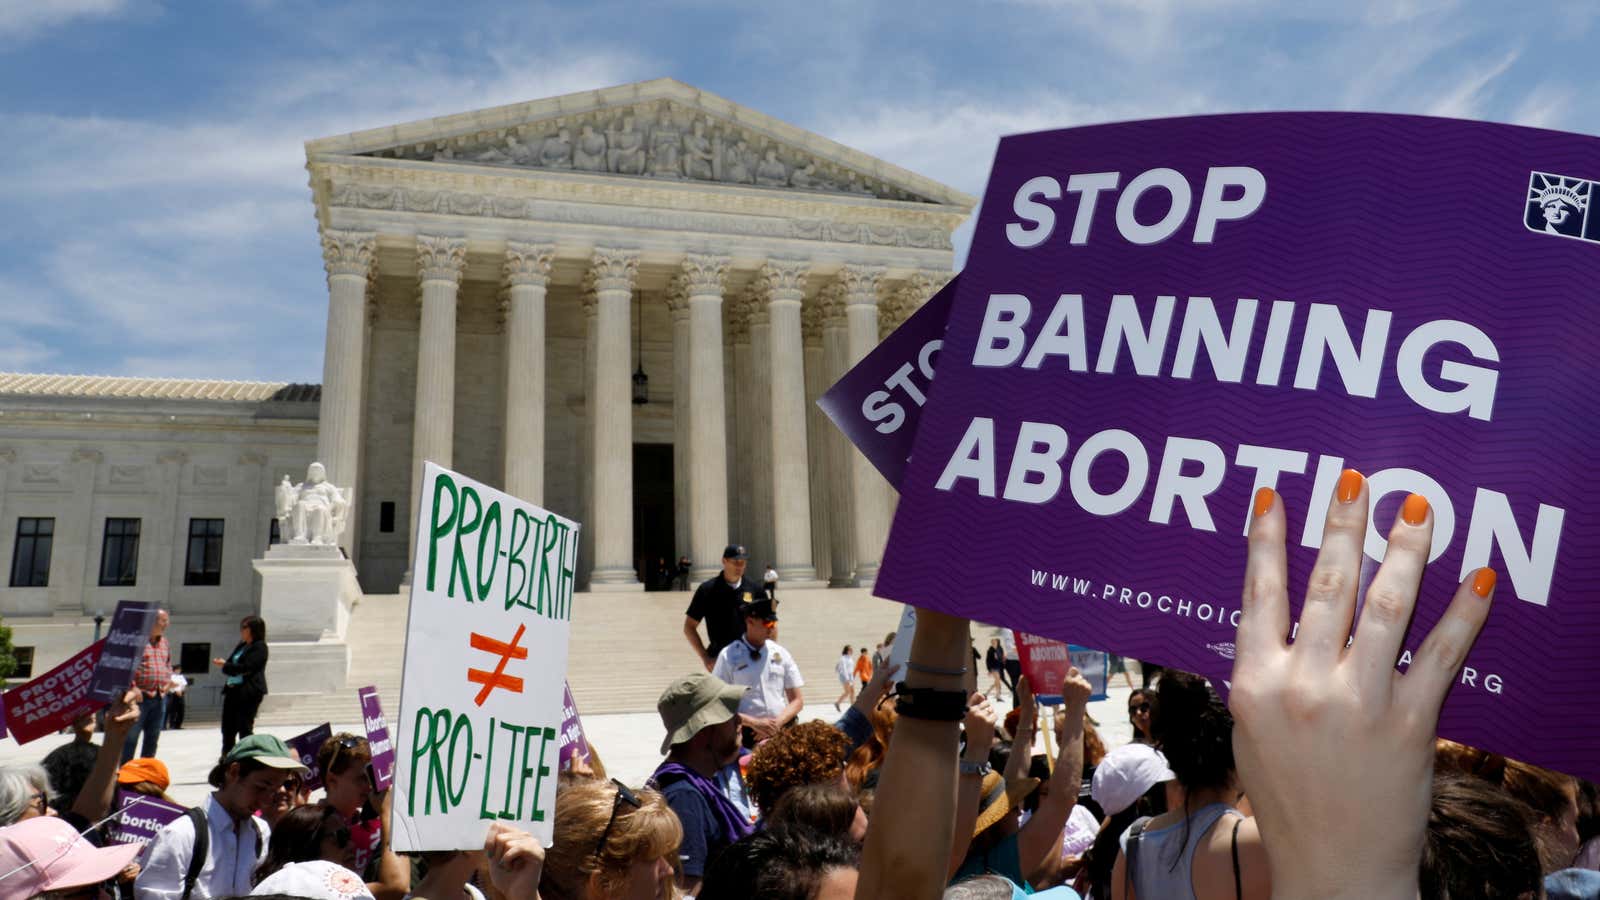 Abortion rights activists rally outside the U.S. Supreme Court in Washington, U.S., May 21, 2019.